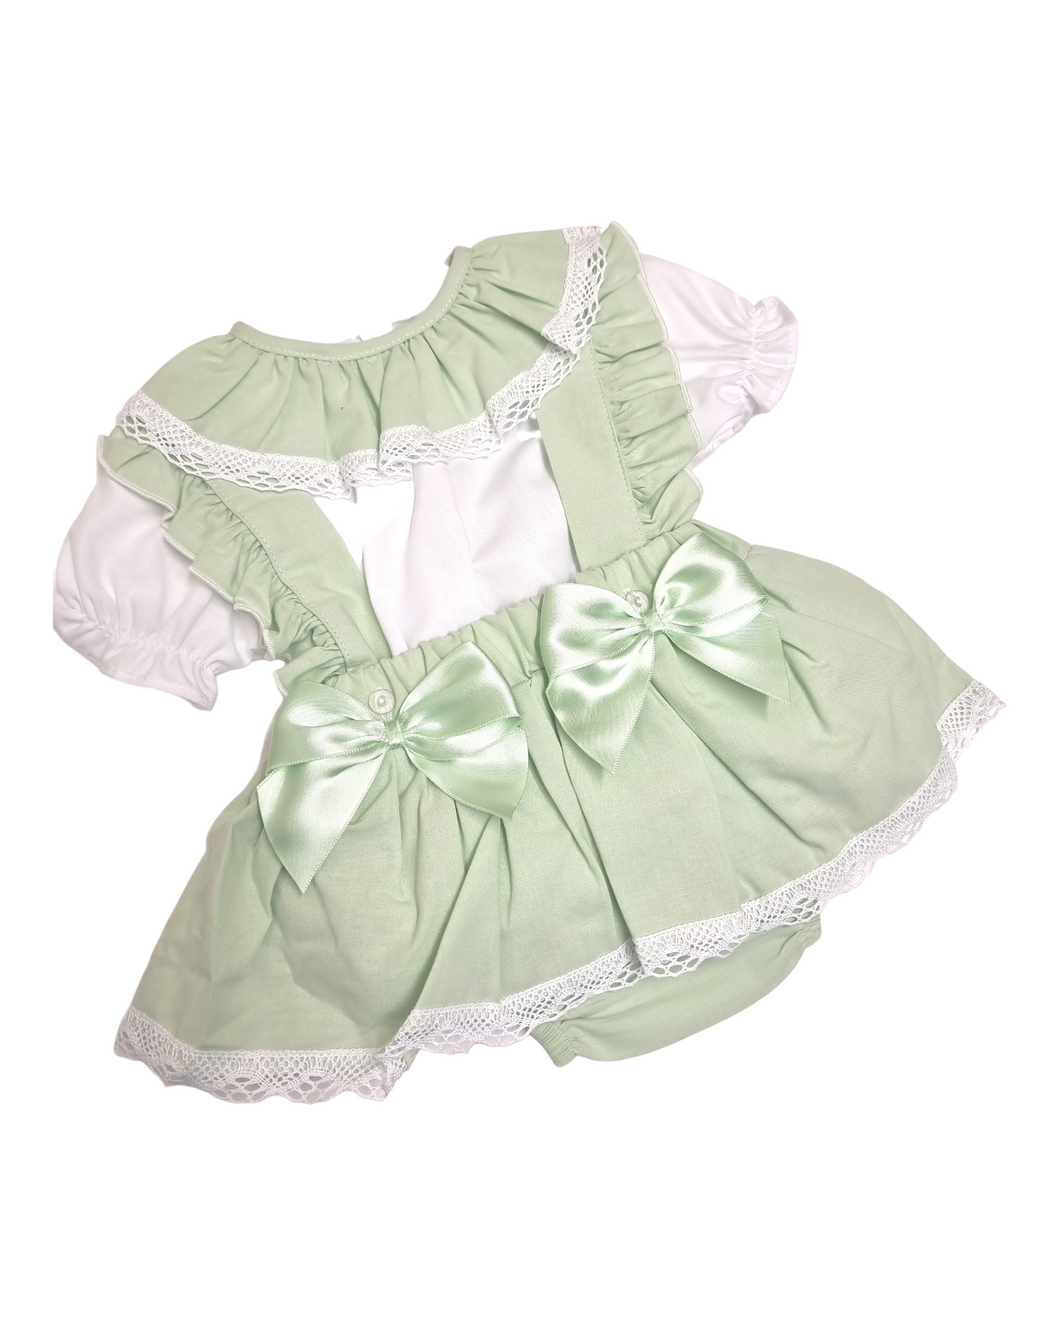 Mint bow baby outfit  2 year